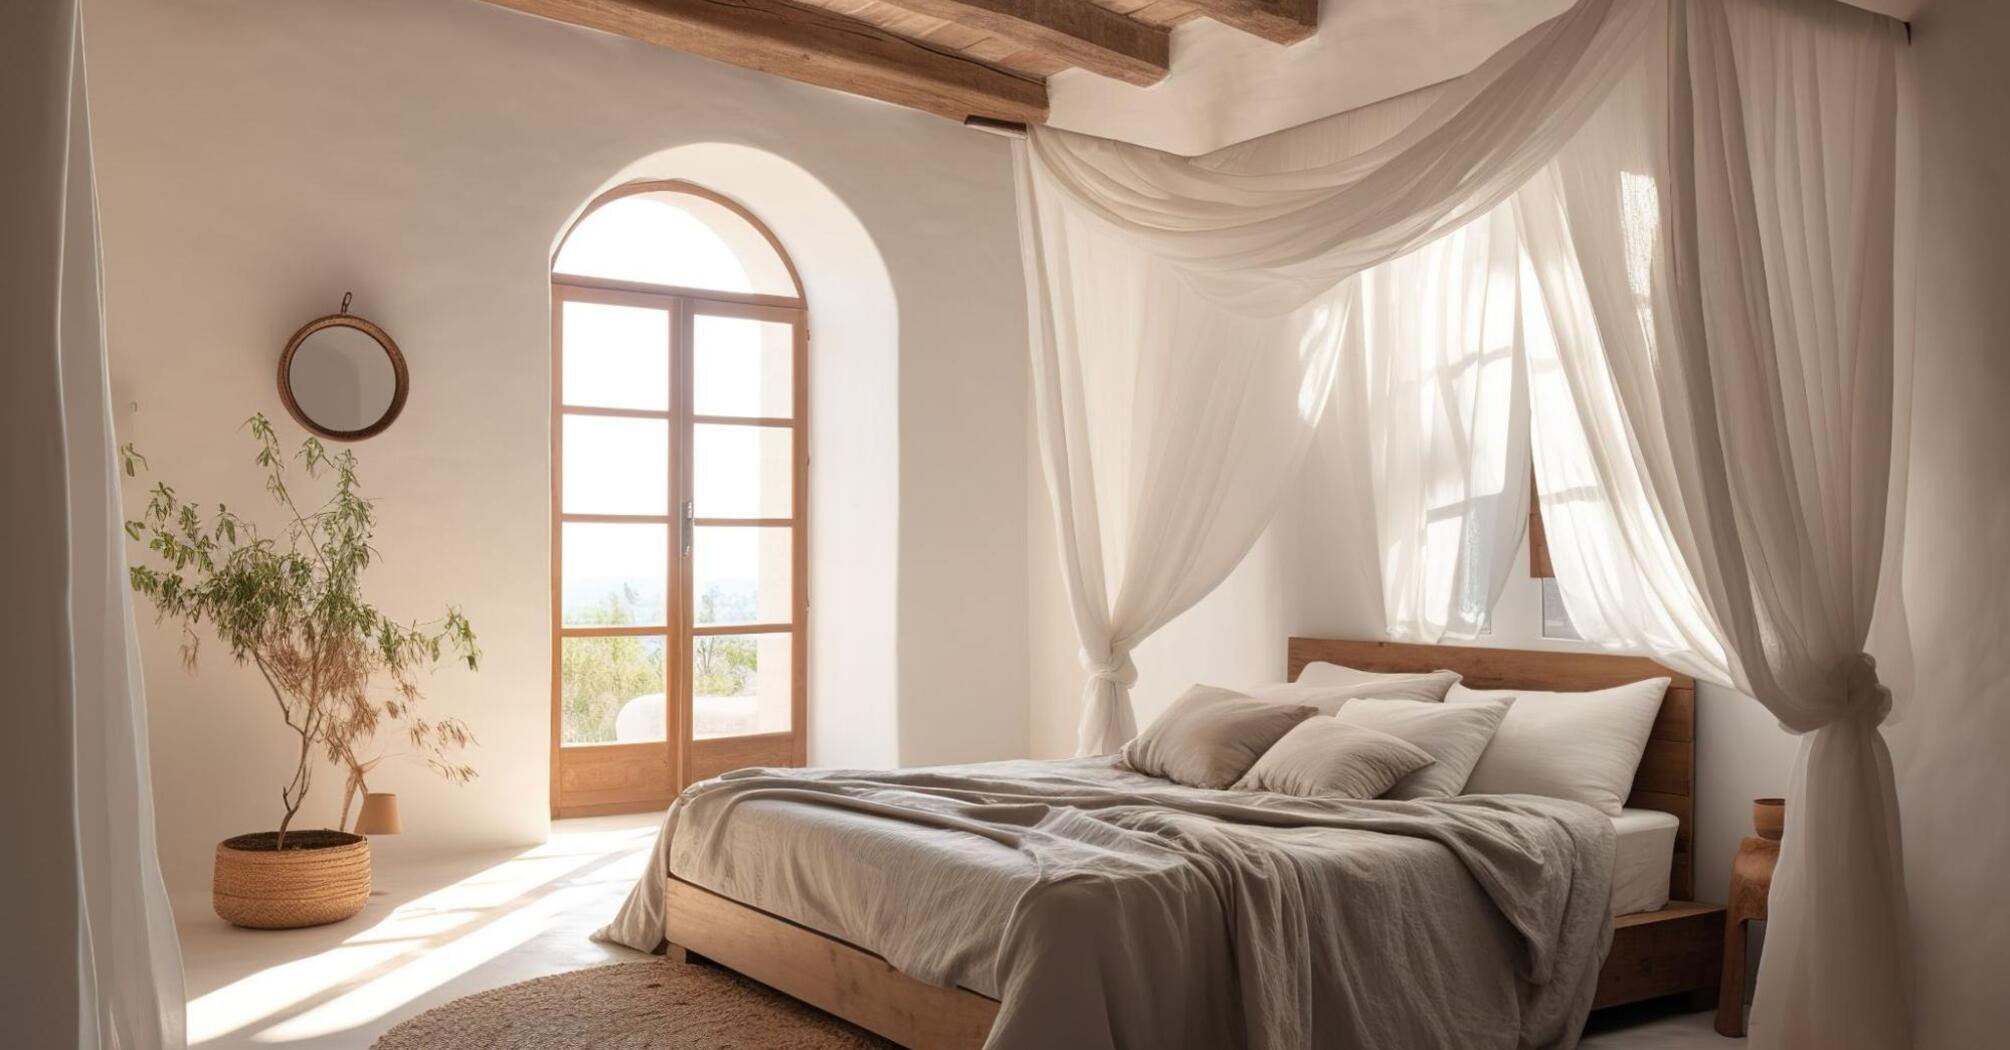 Bedroom in soft colors